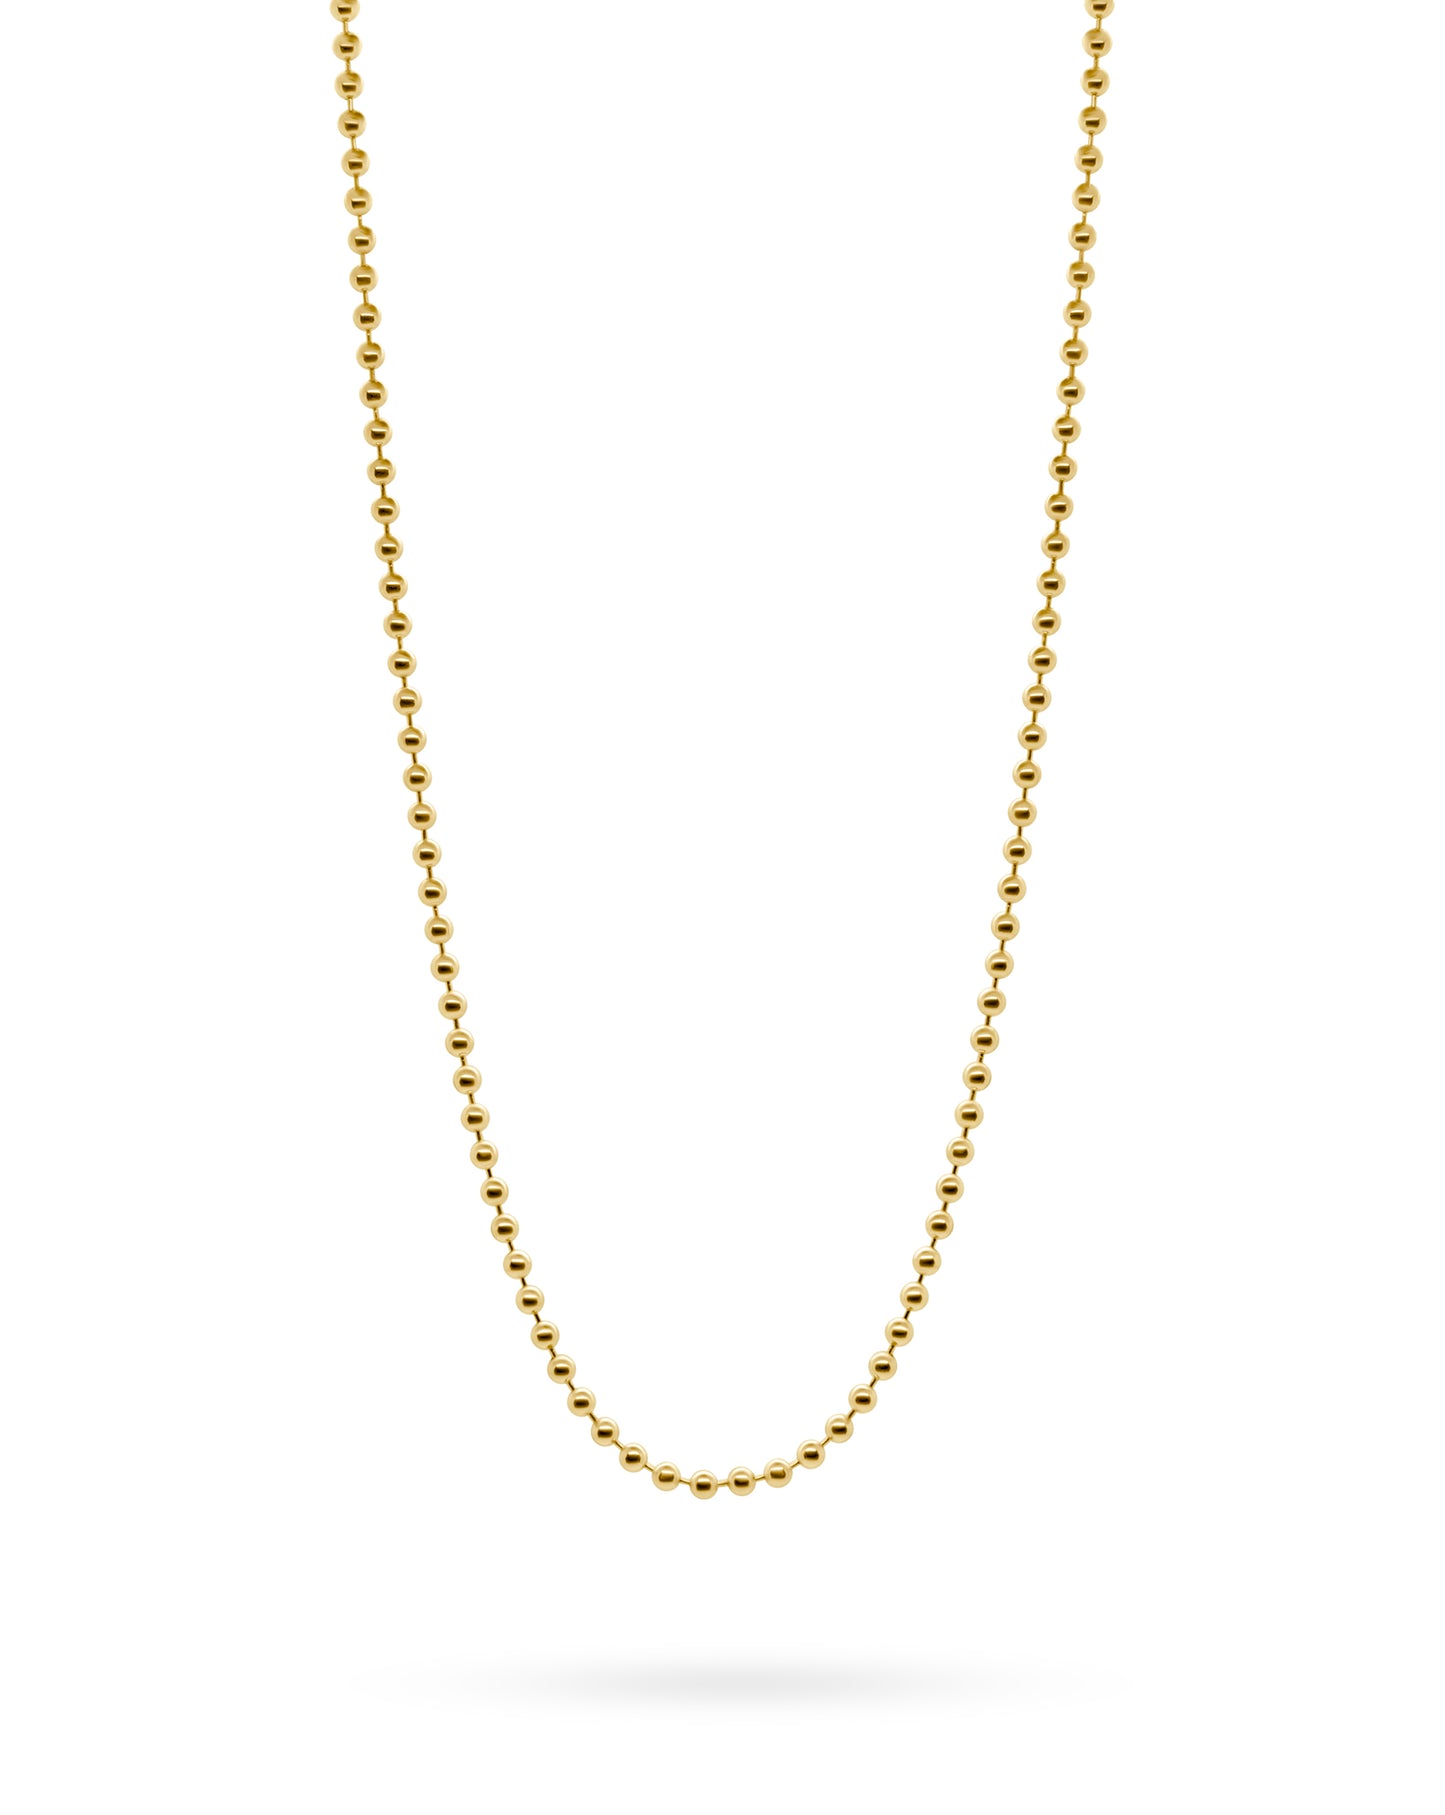 Gold Solid Bead Chain